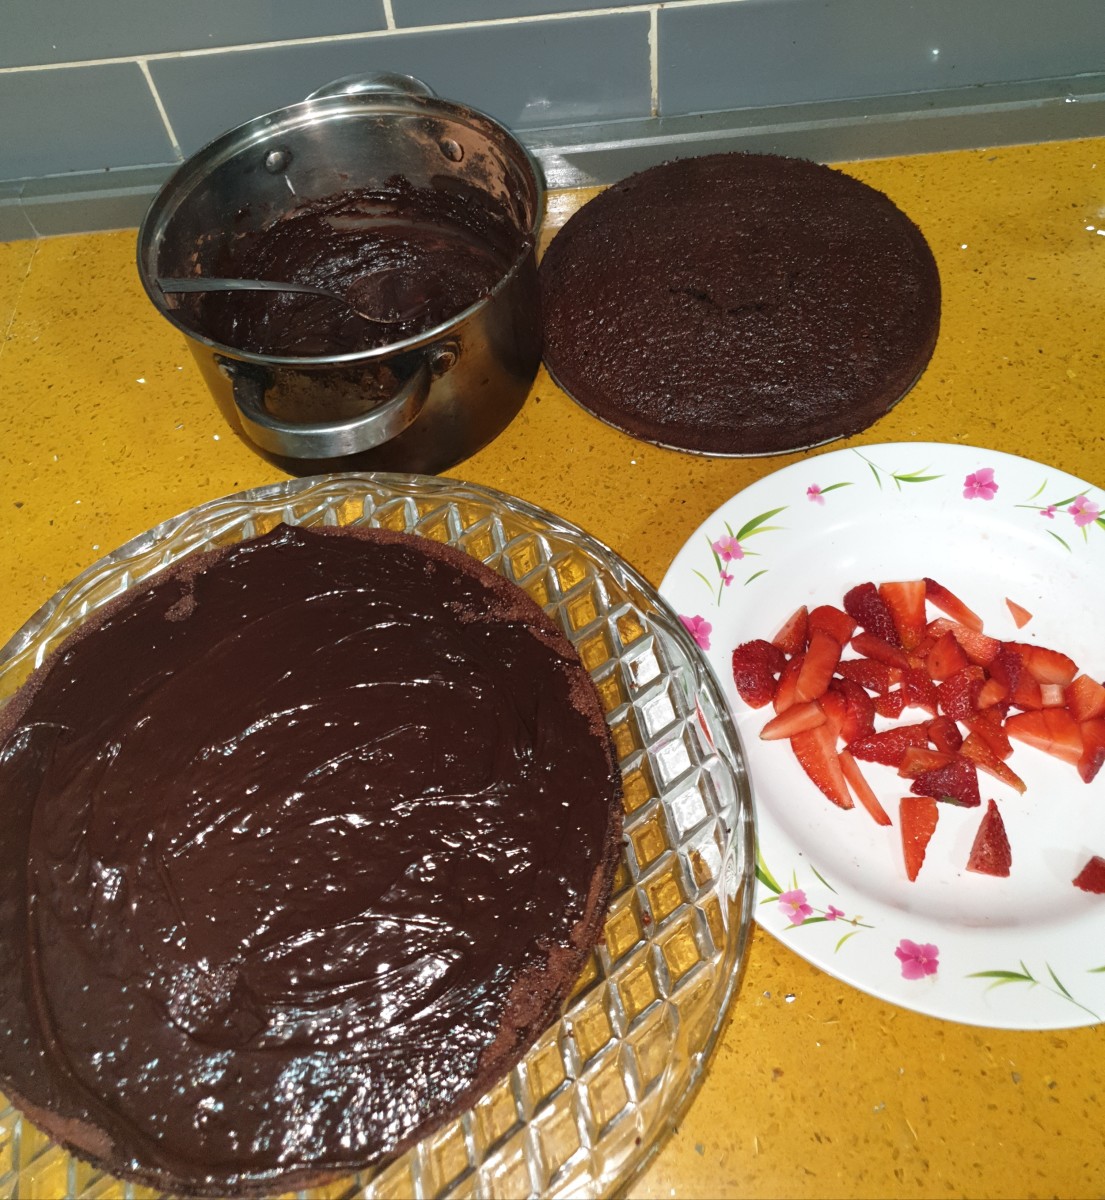 Easy no scales required moist chocolate cake recipe